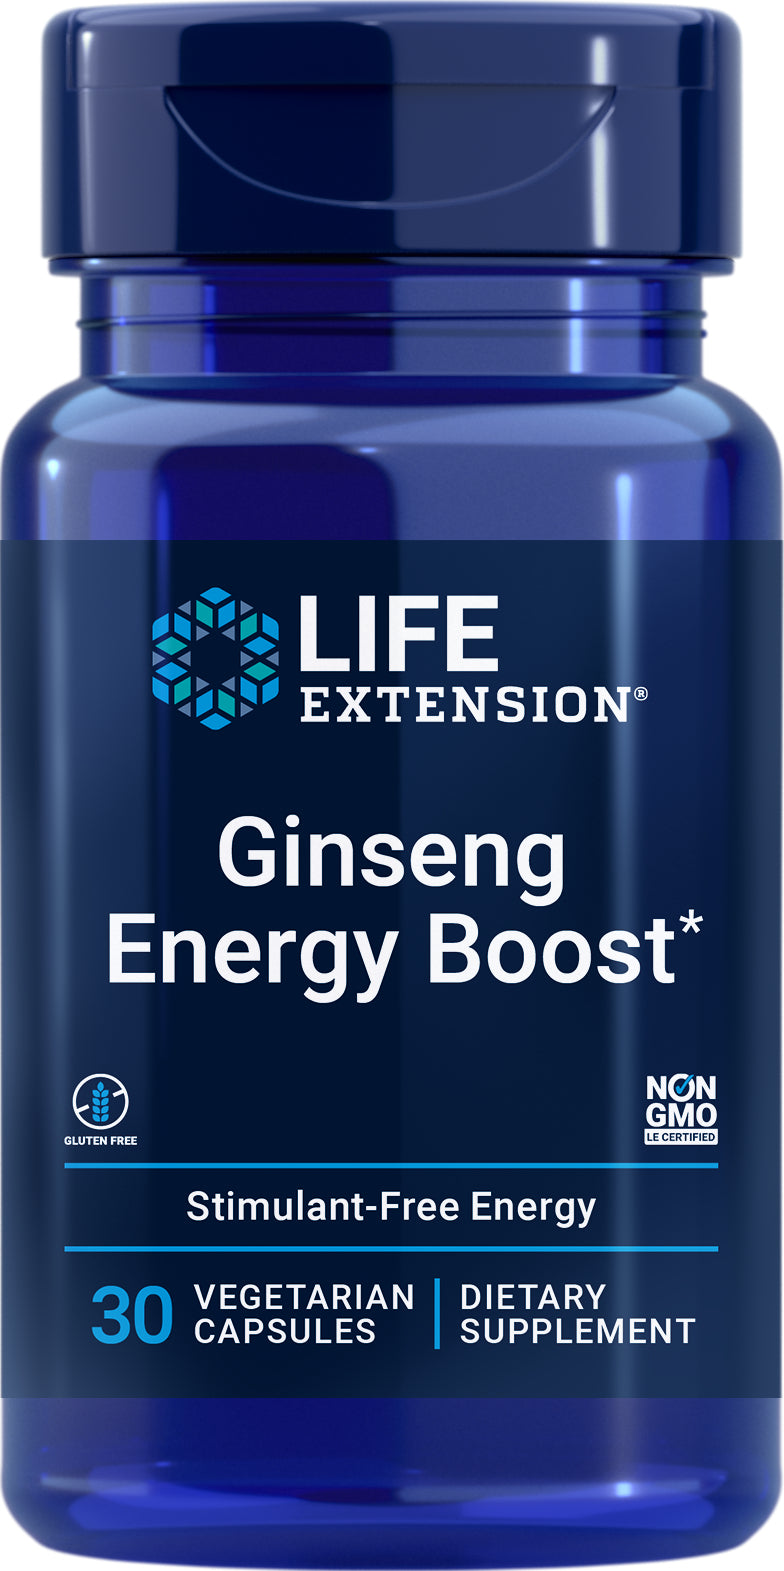 Ginseng Energy Boost 30 veg caps by Life Extension